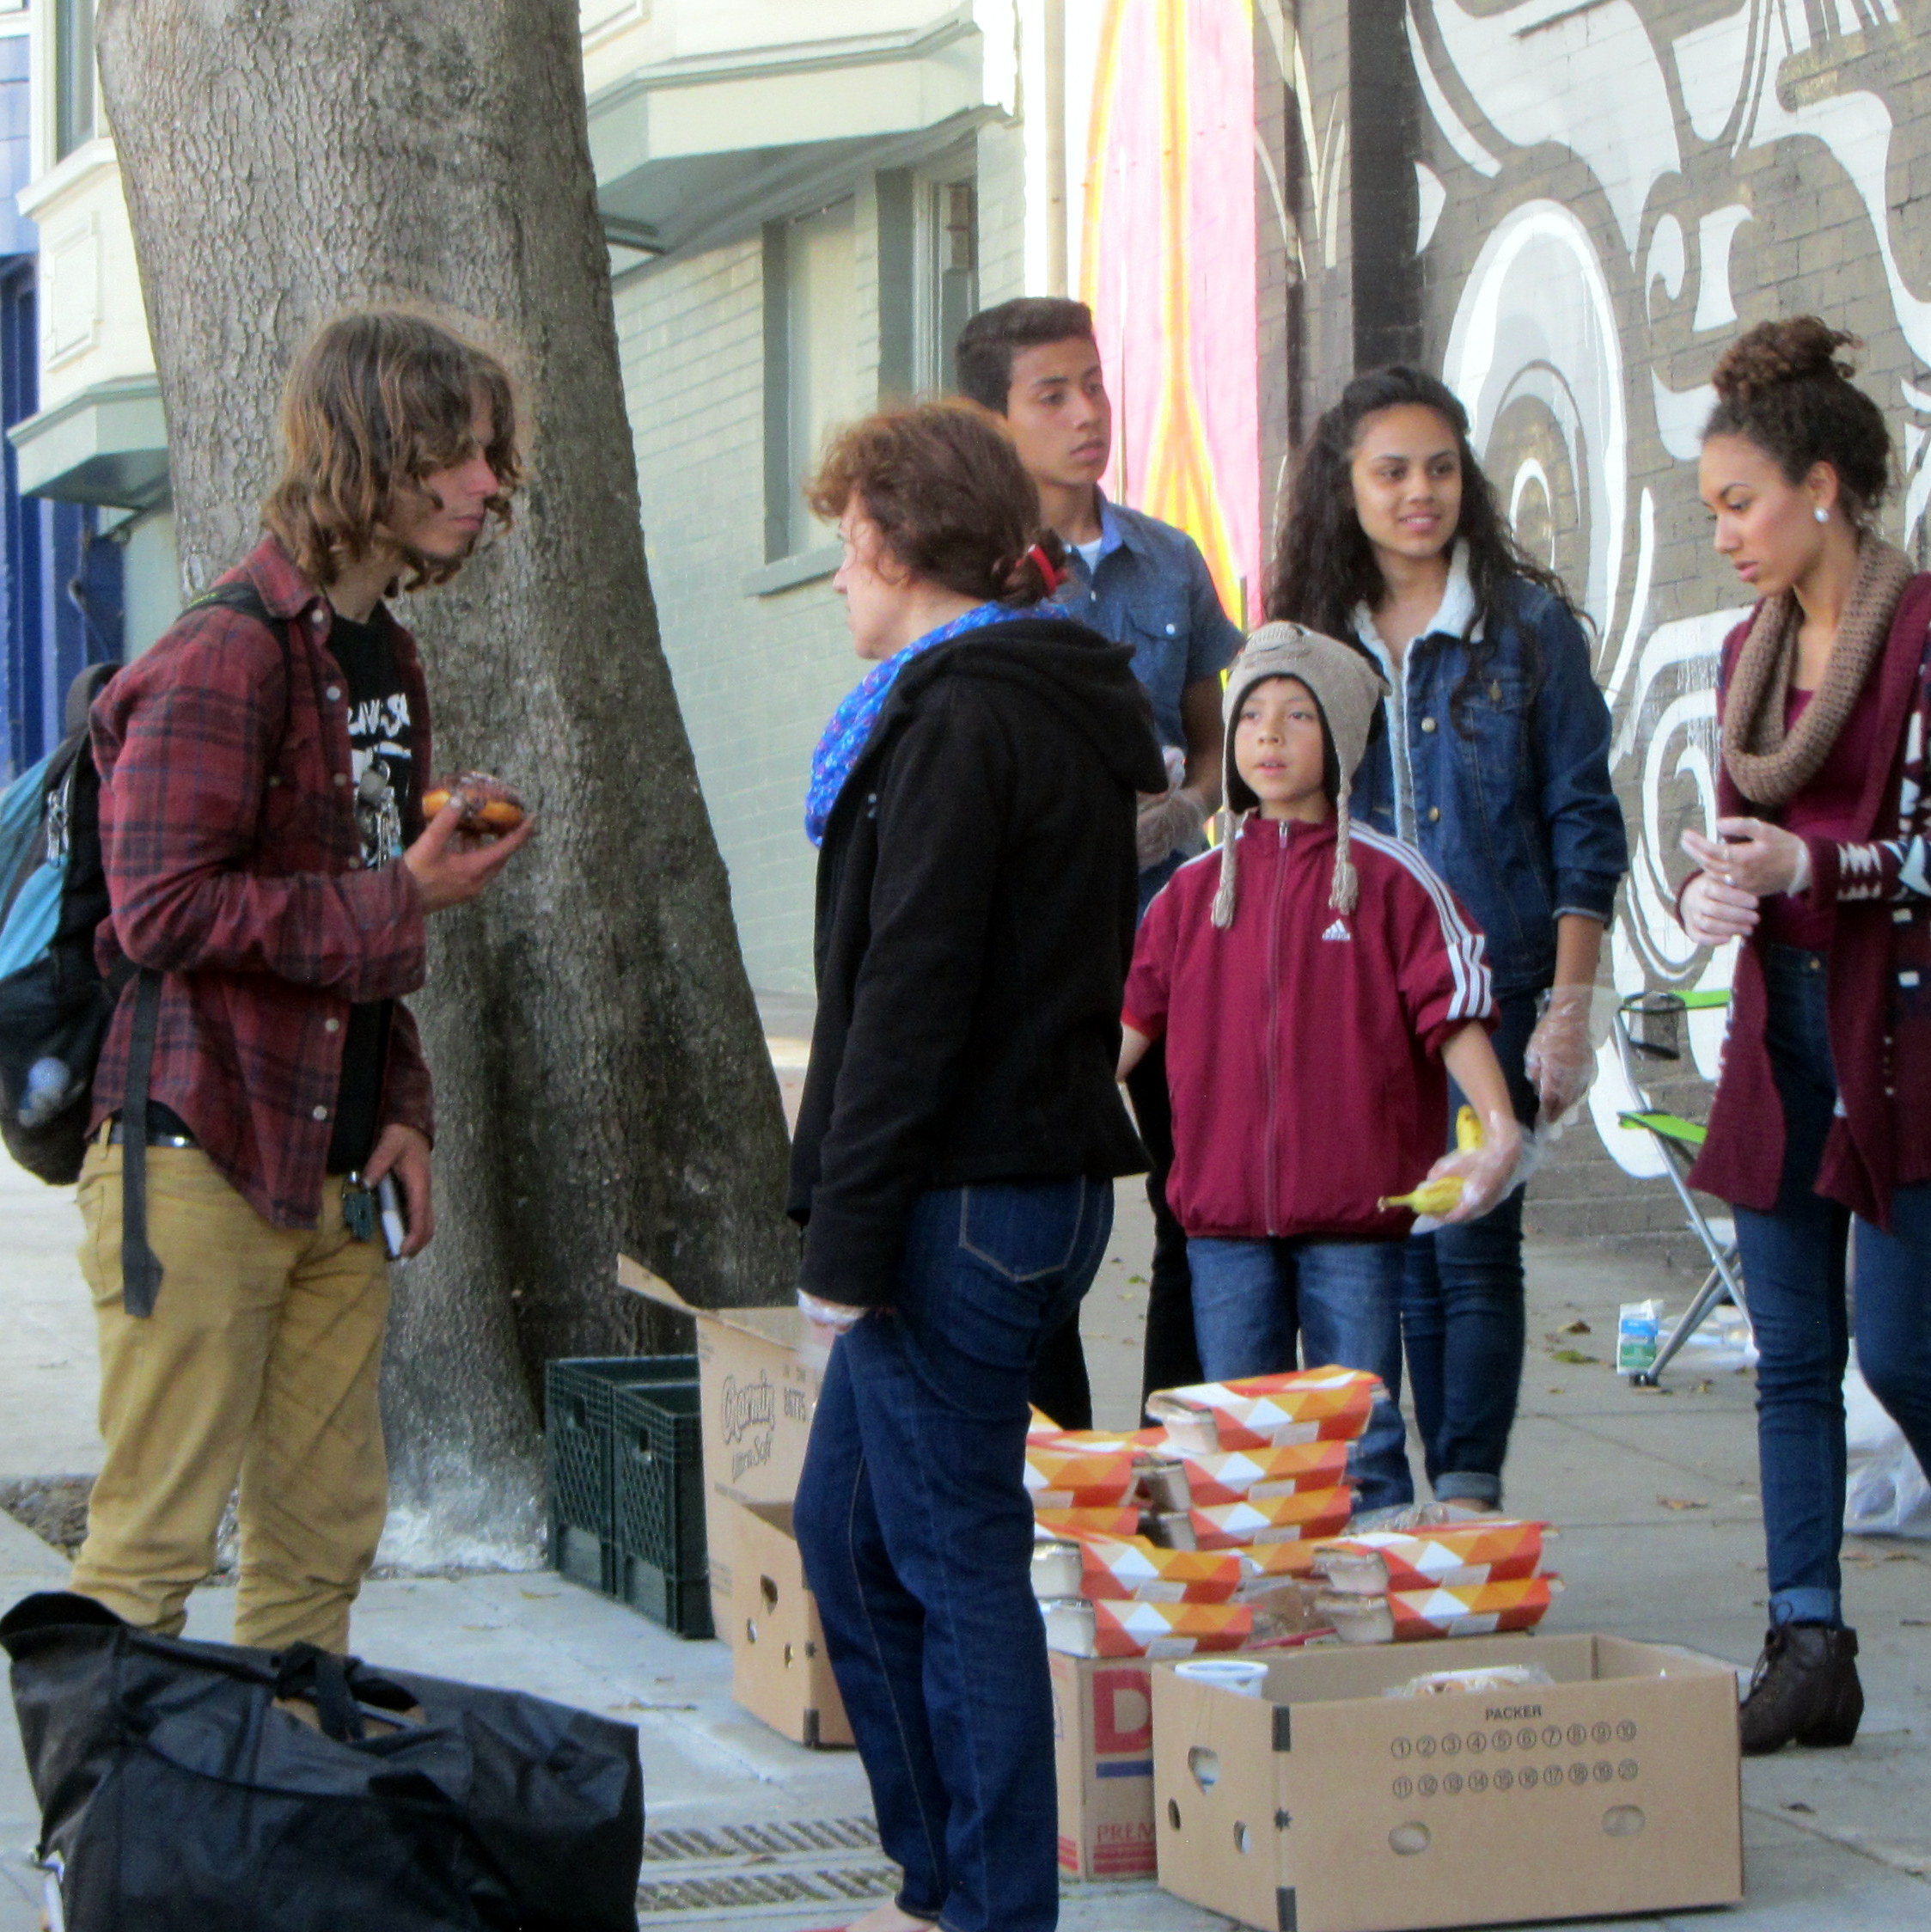 CASTILLO FAMILY WITNESSES AND GIVES OUT FOOD ON HAIGHT ST.